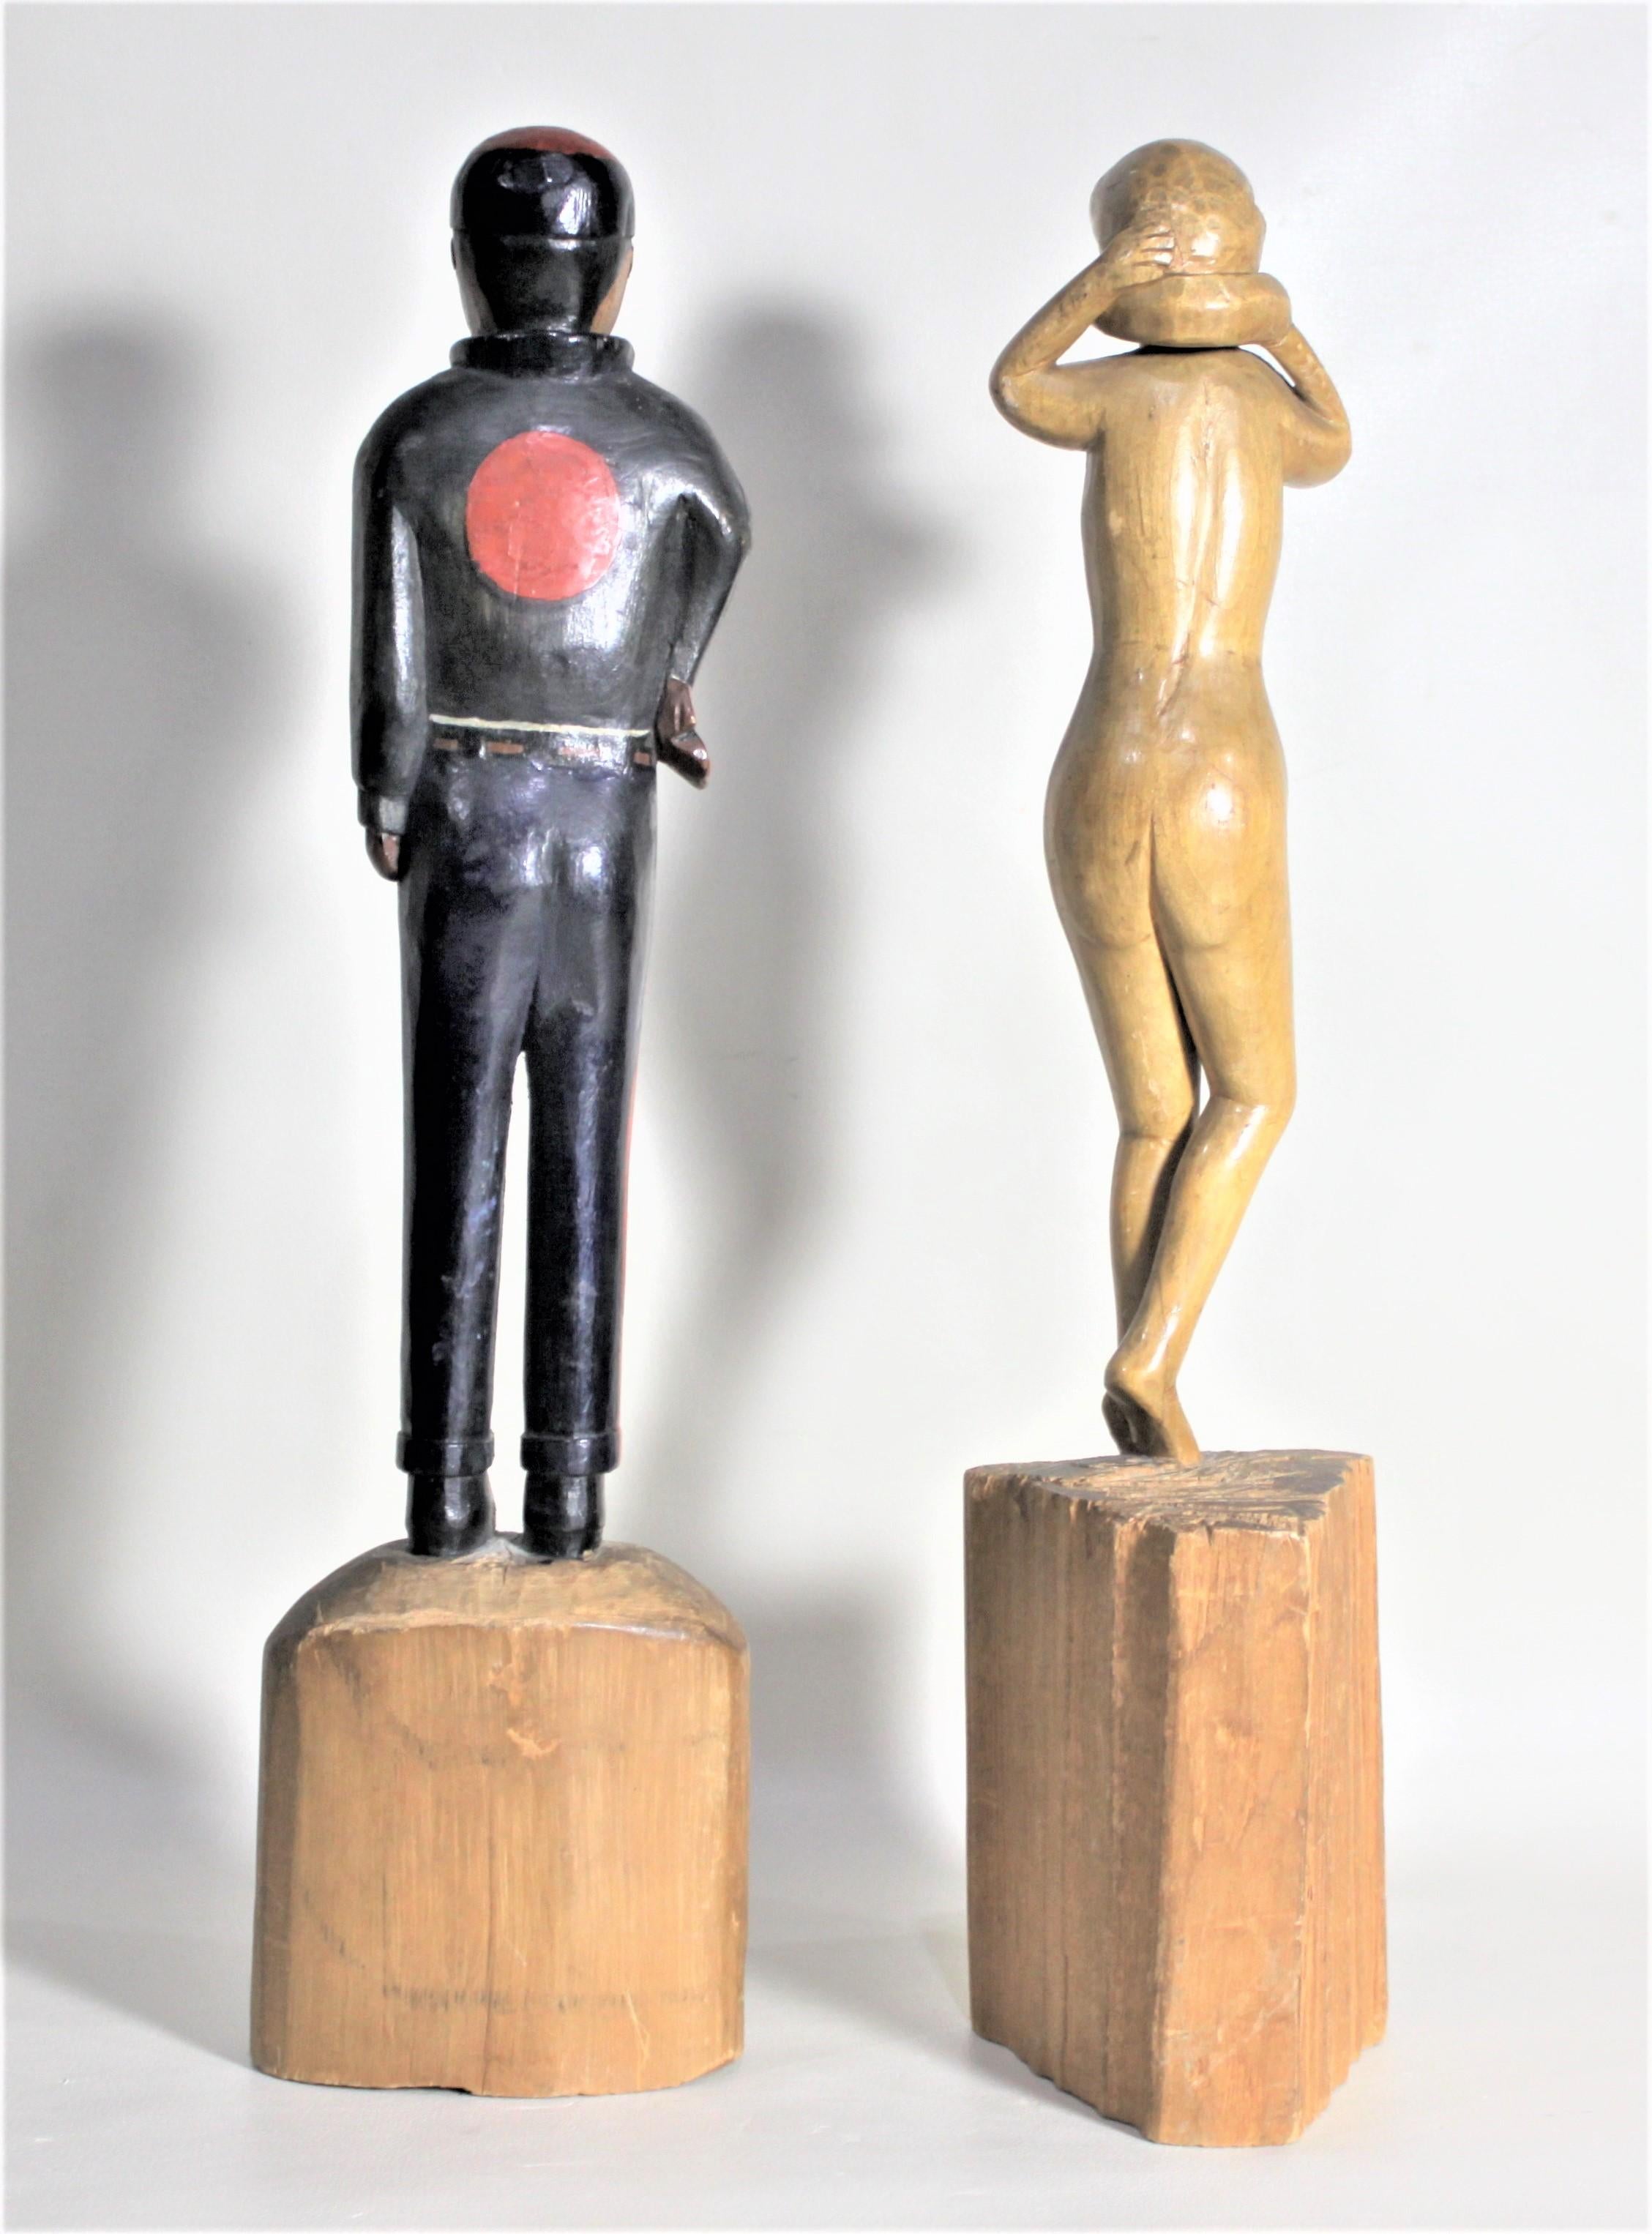 Pair of Canadian Folk Art Carved Japanese Internment Camp Figures or Sculptures In Good Condition For Sale In Hamilton, Ontario